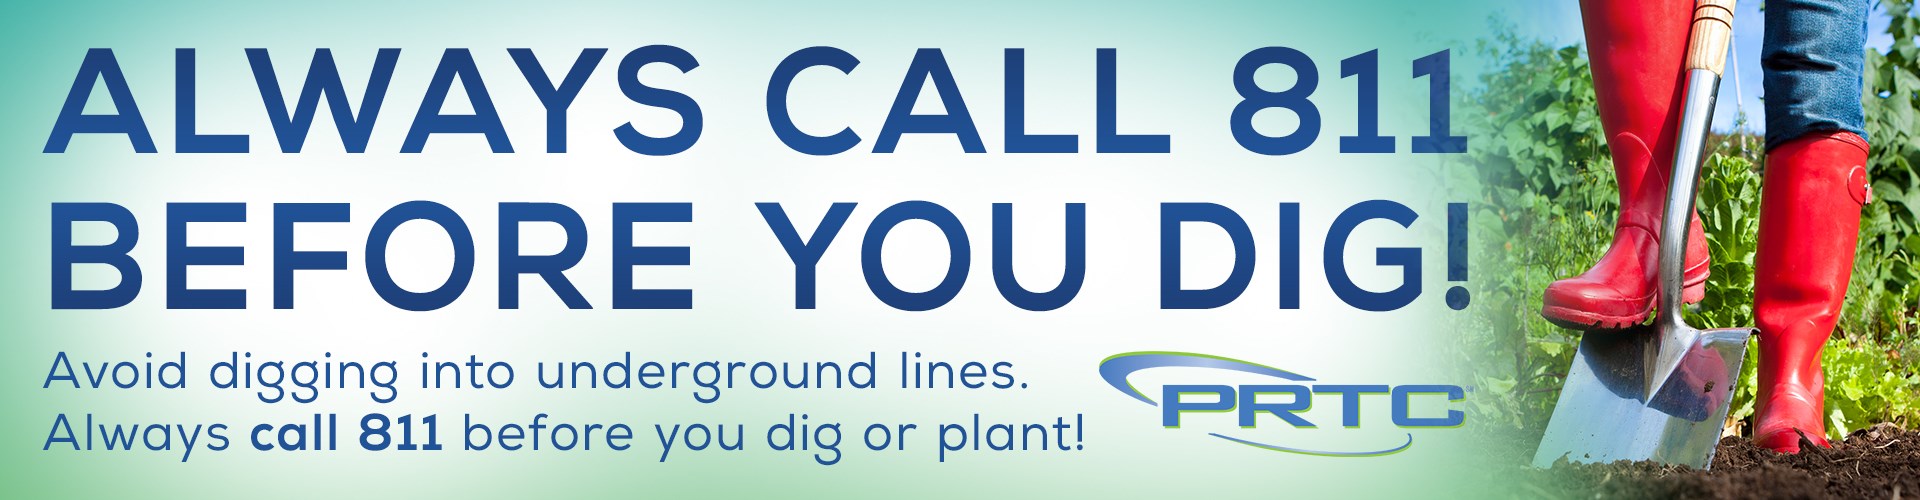 Always Call 811 Before You Dig!